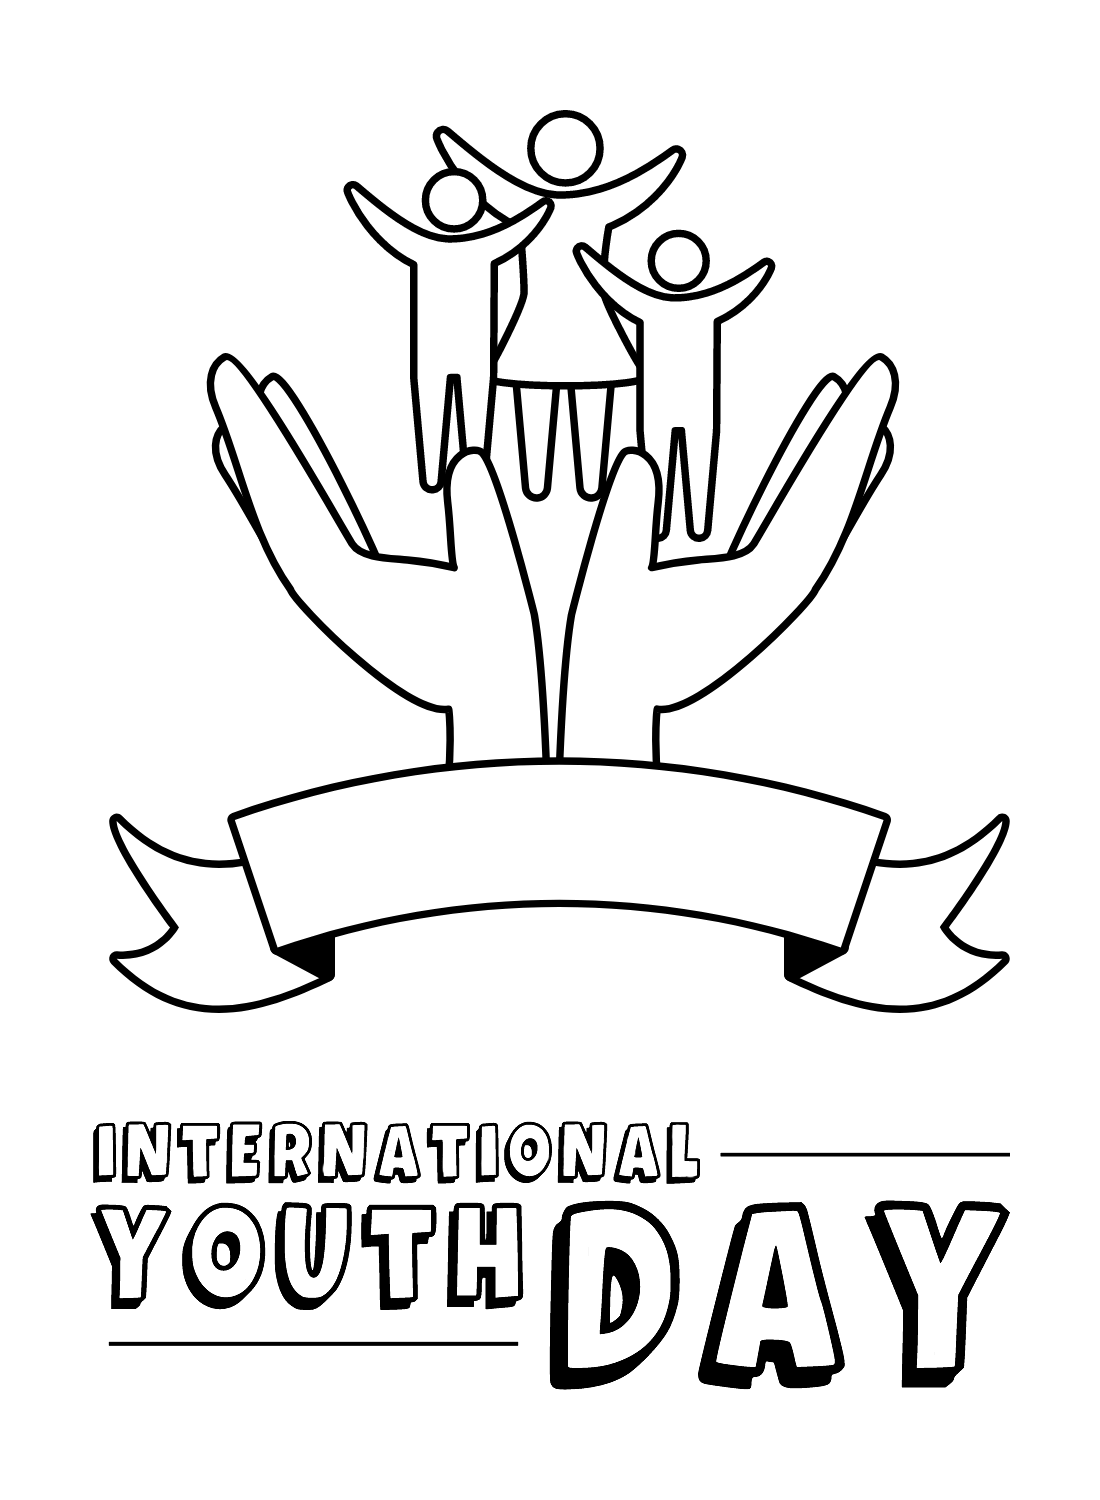 International Youth Day Coloring Page for Kids from International Youth Day